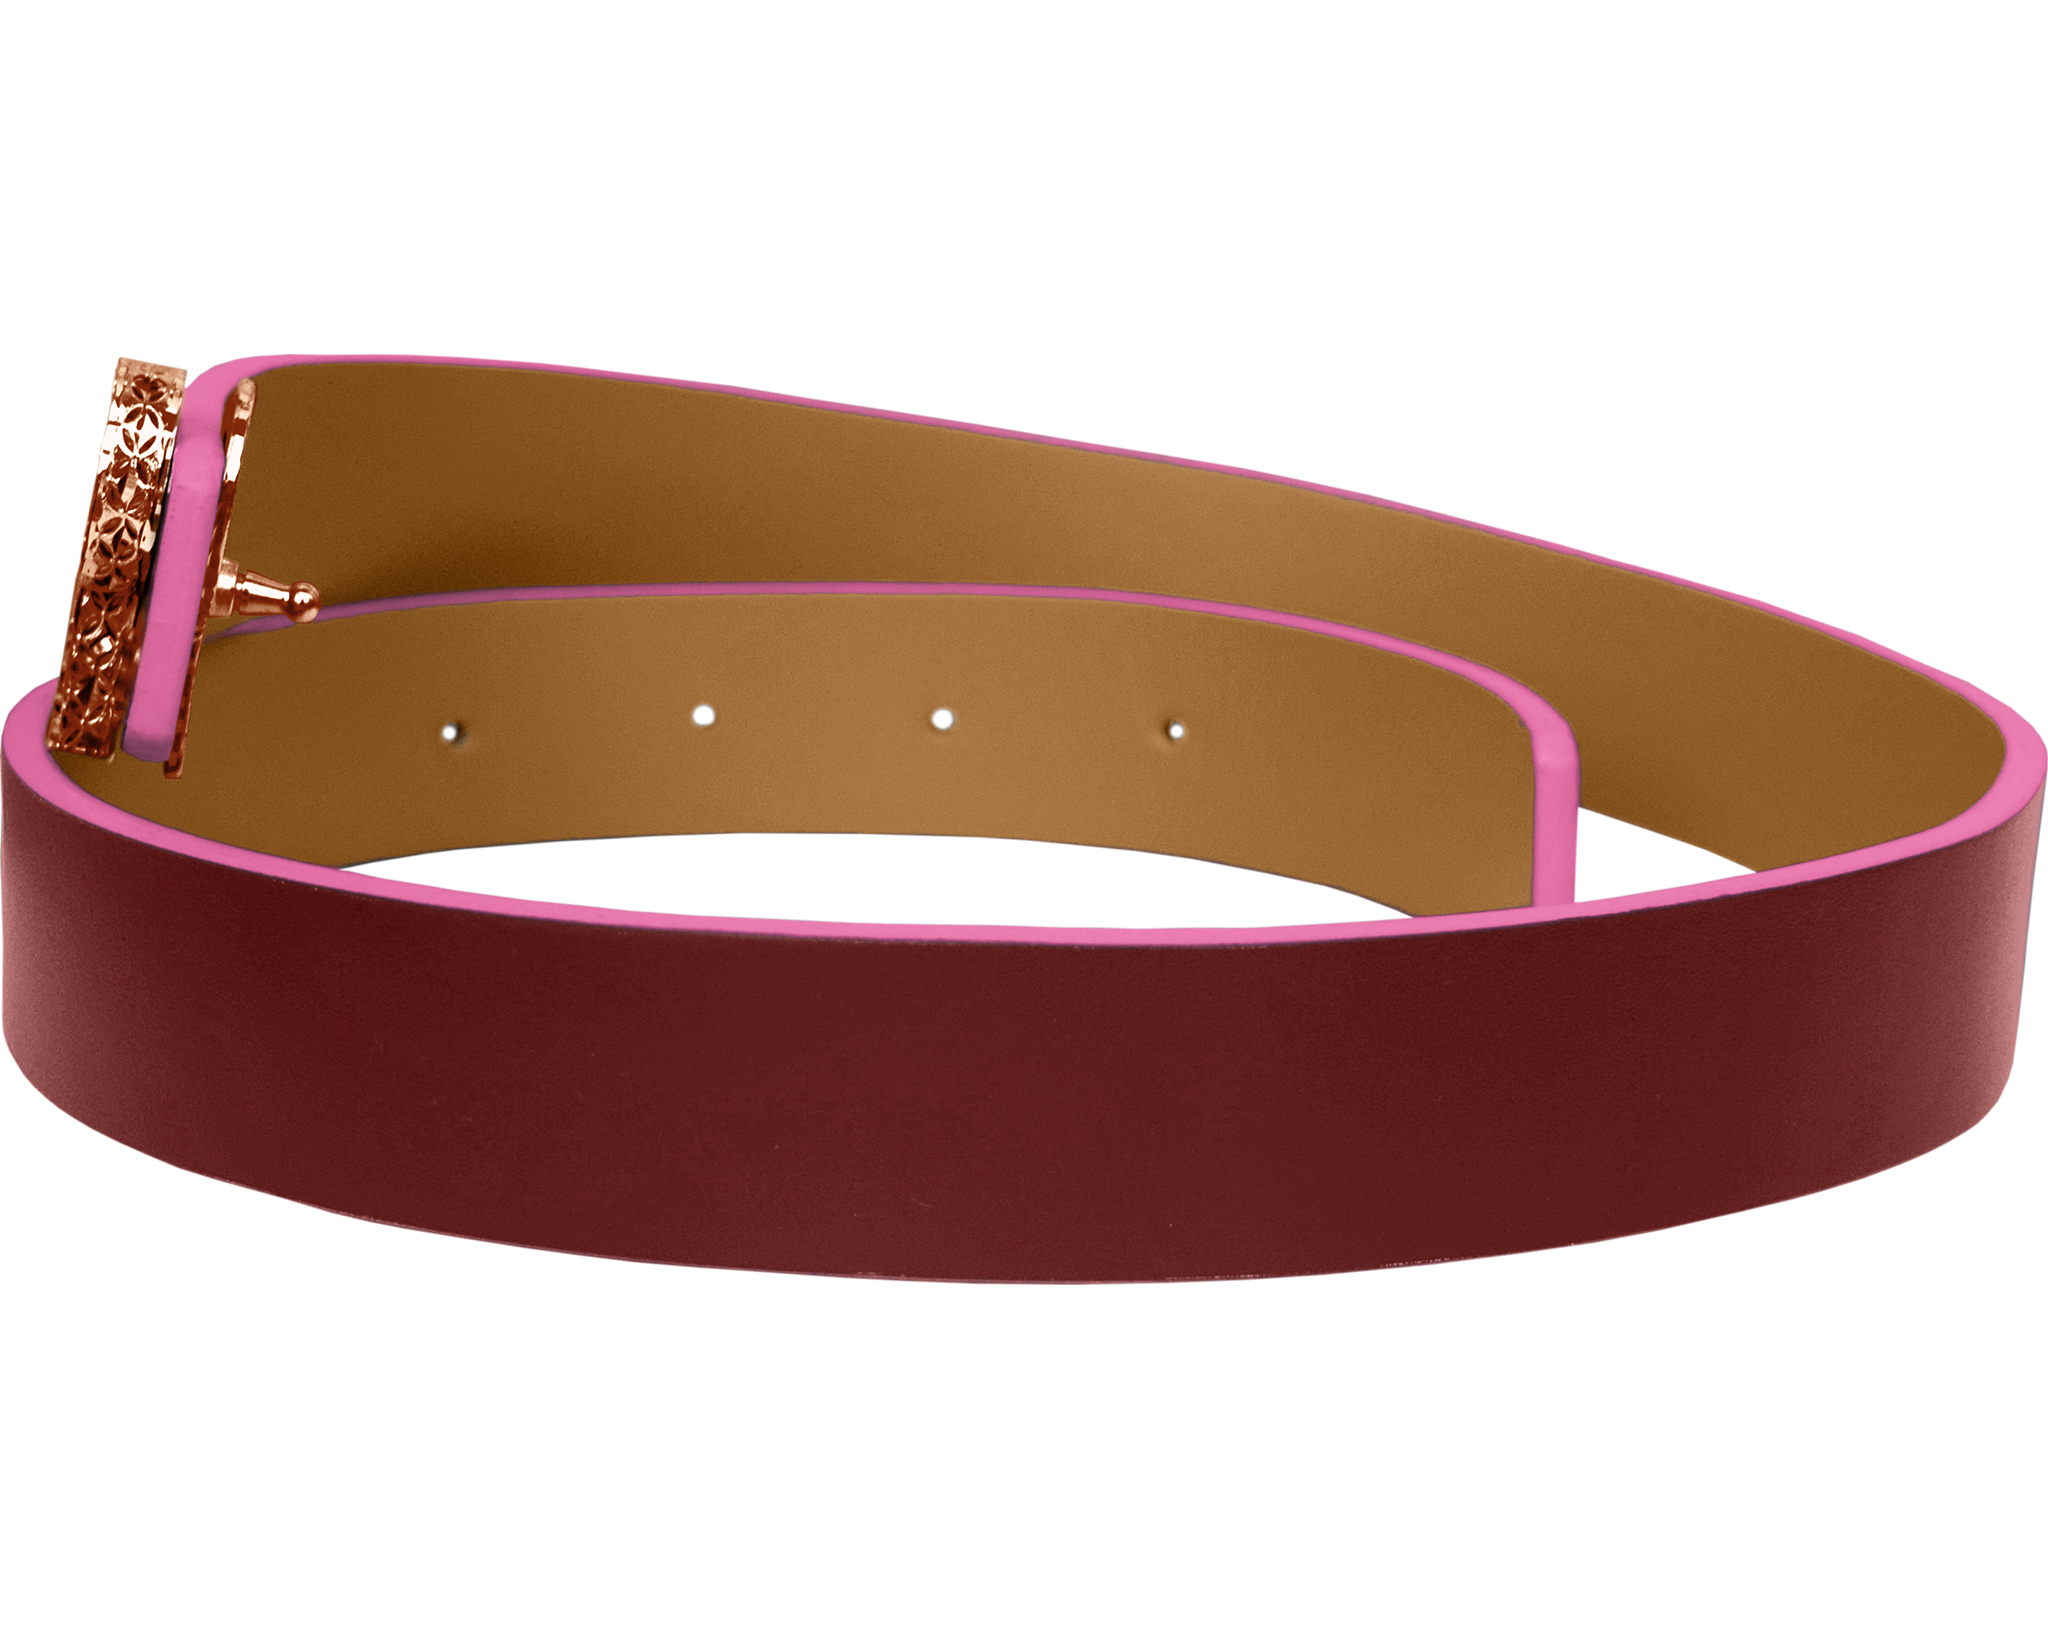 Forever Luxury is unmissed with the CORNELIA reversible belt in Navy/Bordeaux